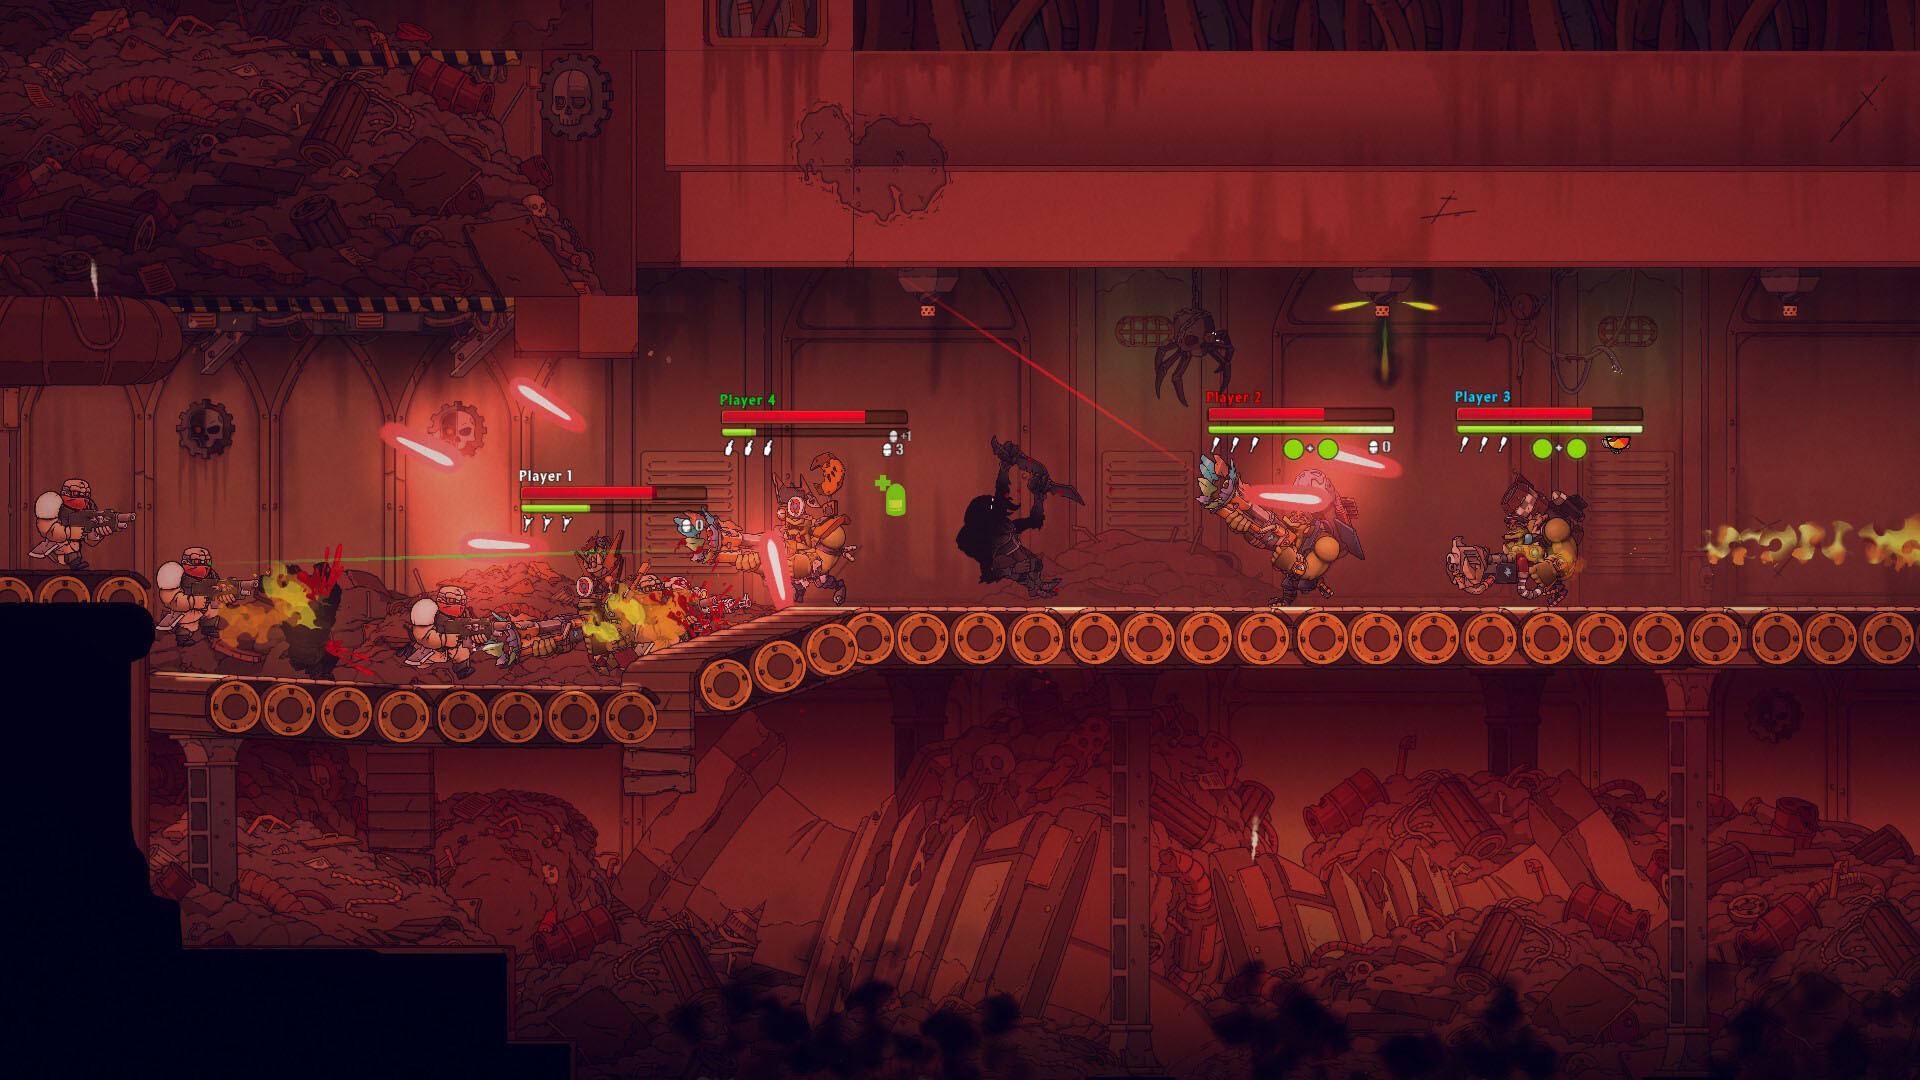 2D run-and-gun platformer Warhammer 40,000: Shootas, Blood & Teef announced  for PS5, Xbox Series, PS4, Xbox One, Switch, and PC - Gematsu